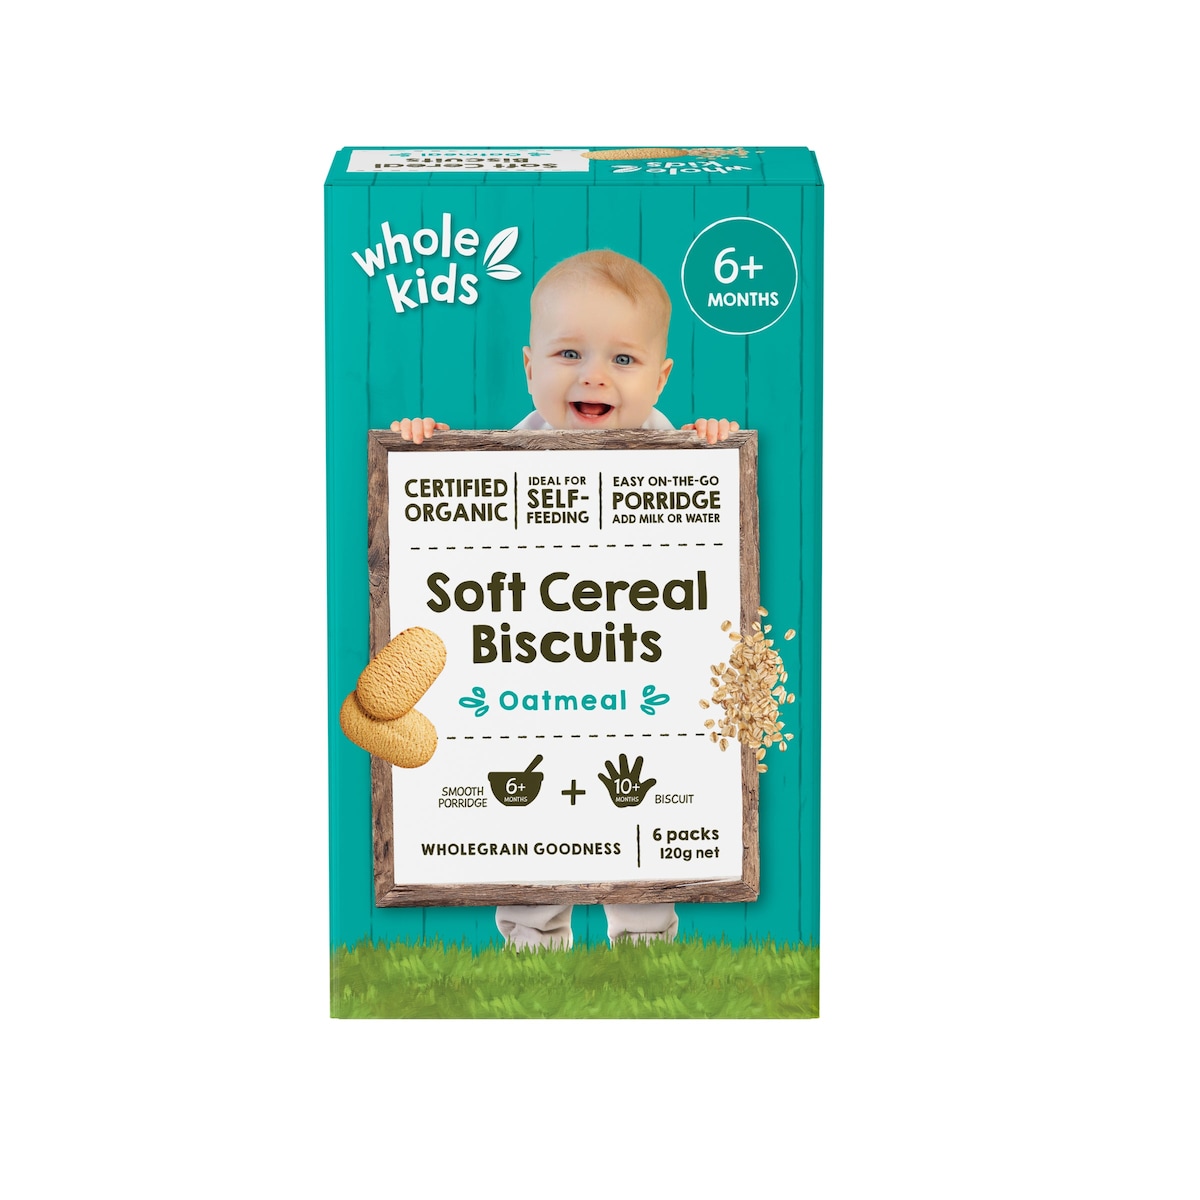 Whole Kids Organic Soft Cereal Biscuits Oatmeal 120g